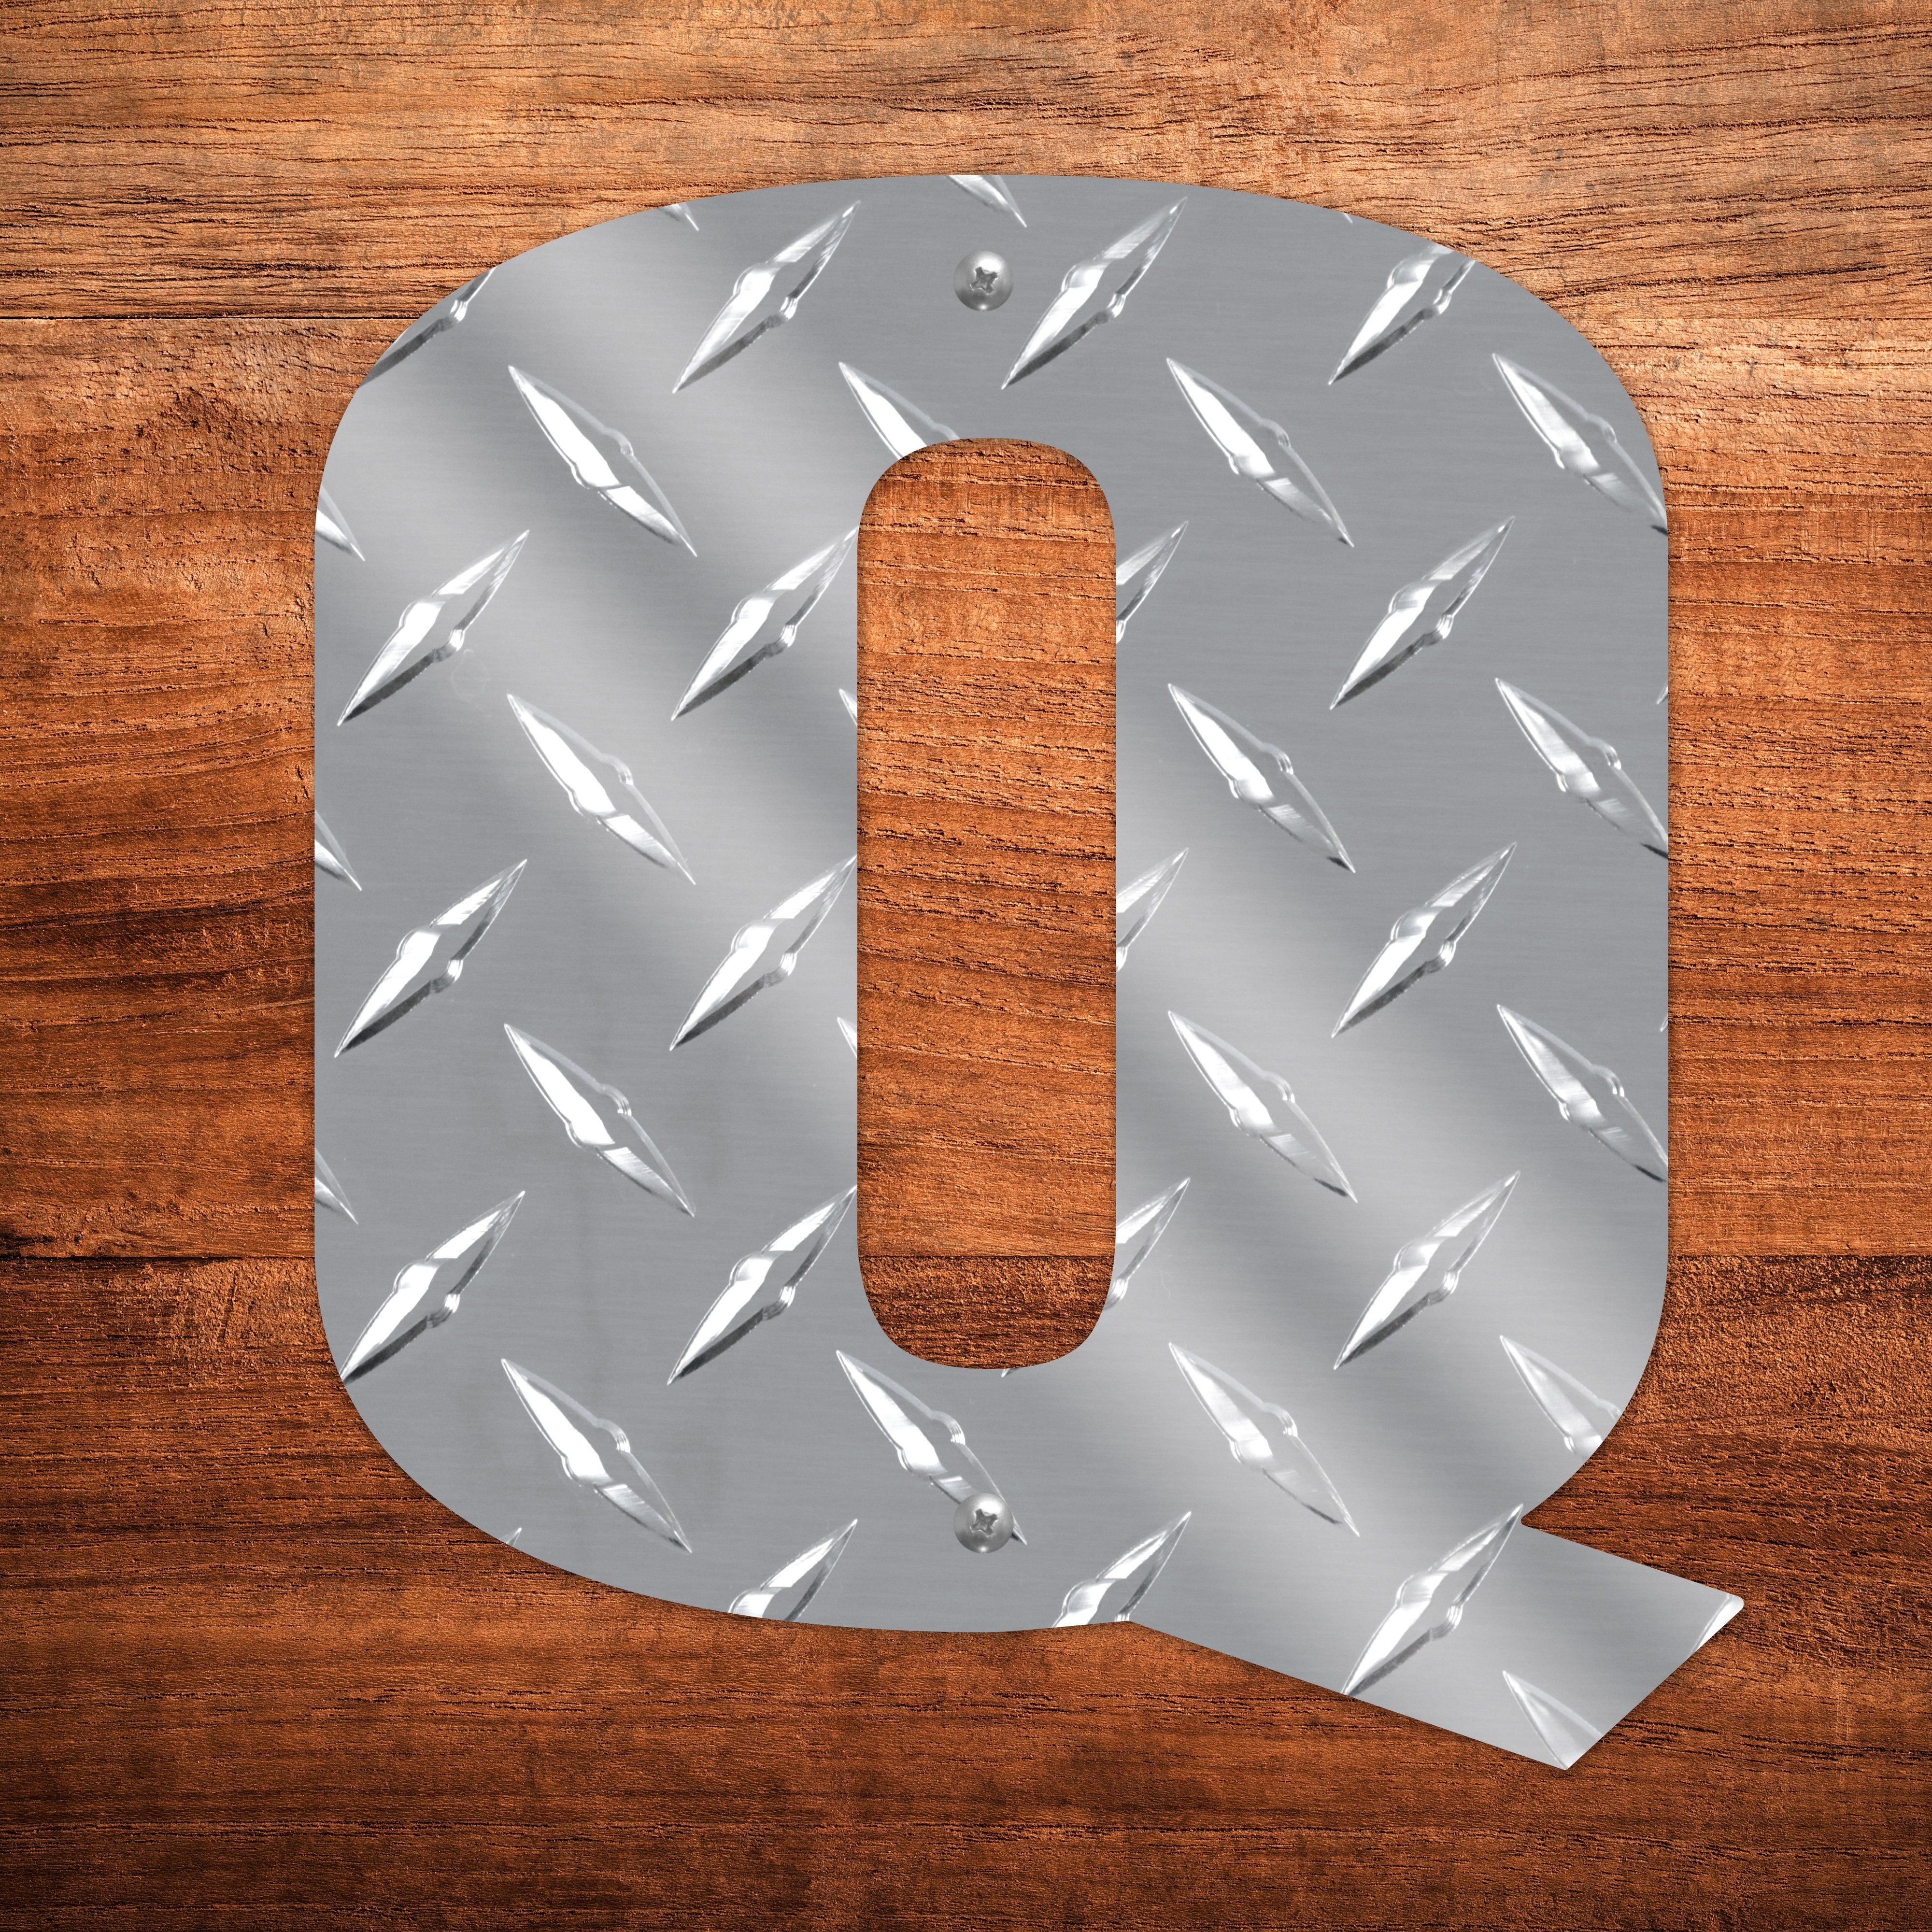 Letter Q Hanging Metal Wall Decor Durable Polished Aluminum Diamond Tread Pattern Indoor Outdoor with Mounting Hardware 7.8 Inches Tall